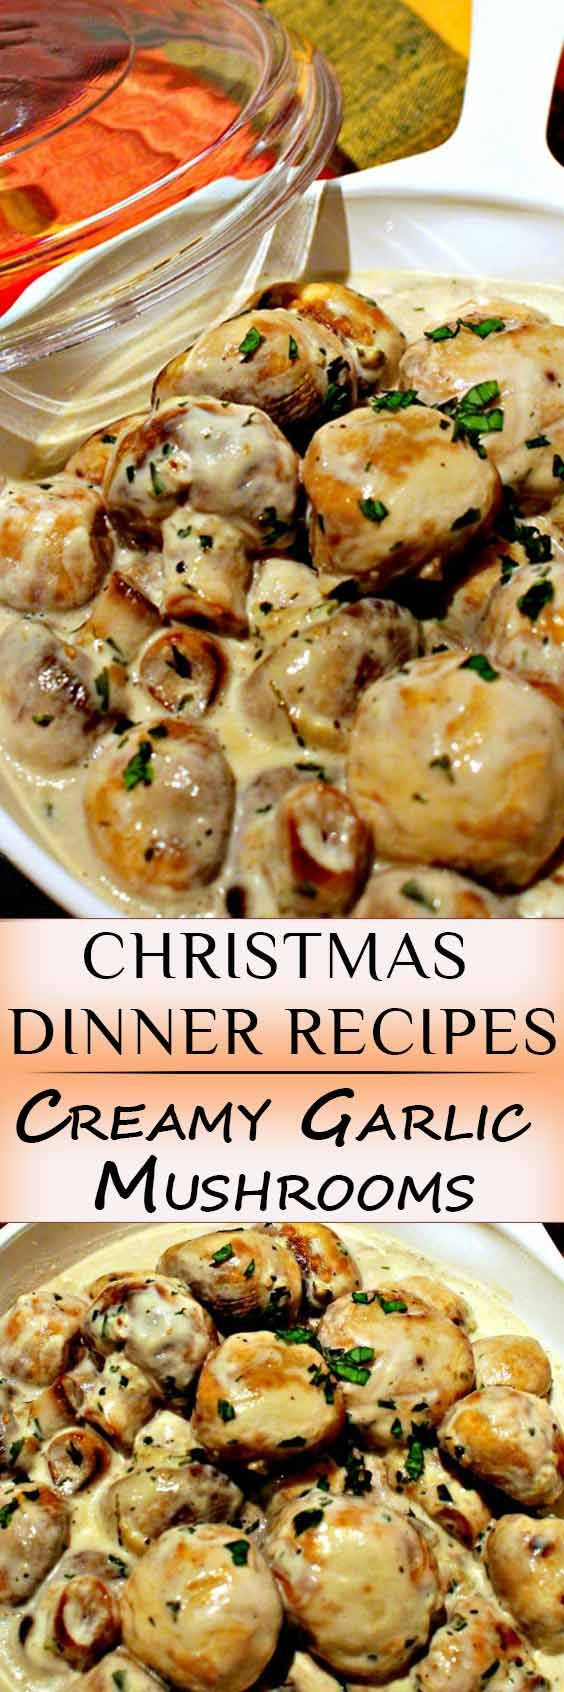 Non Traditional Unique Christmas Dinner Ideas / 10 Most ...